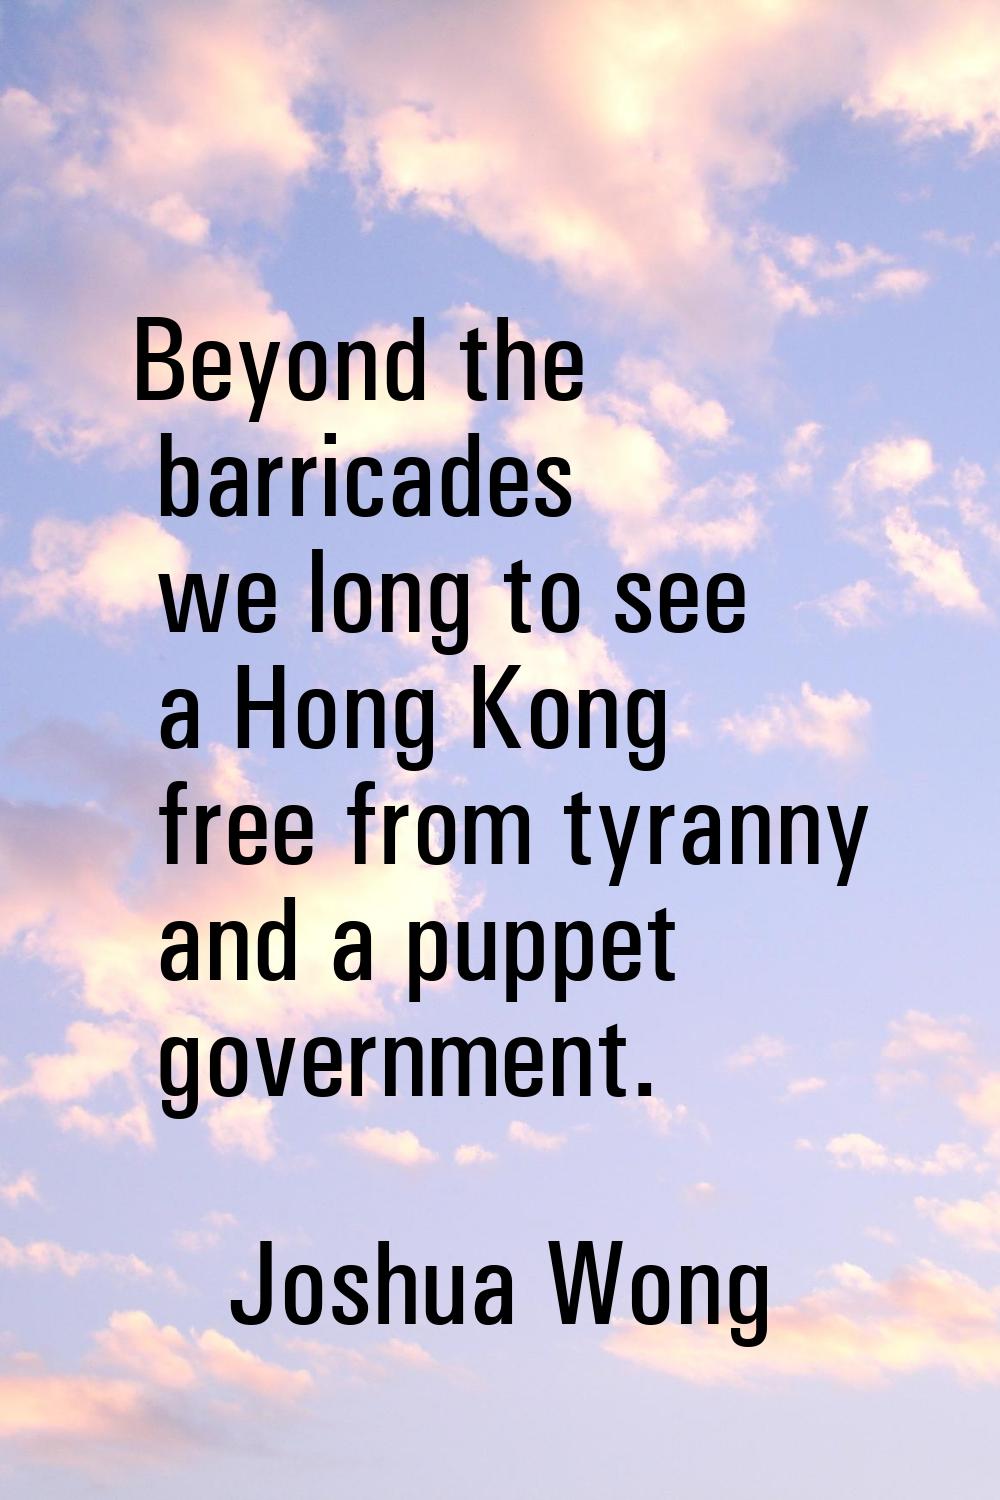 Beyond the barricades we long to see a Hong Kong free from tyranny and a puppet government.